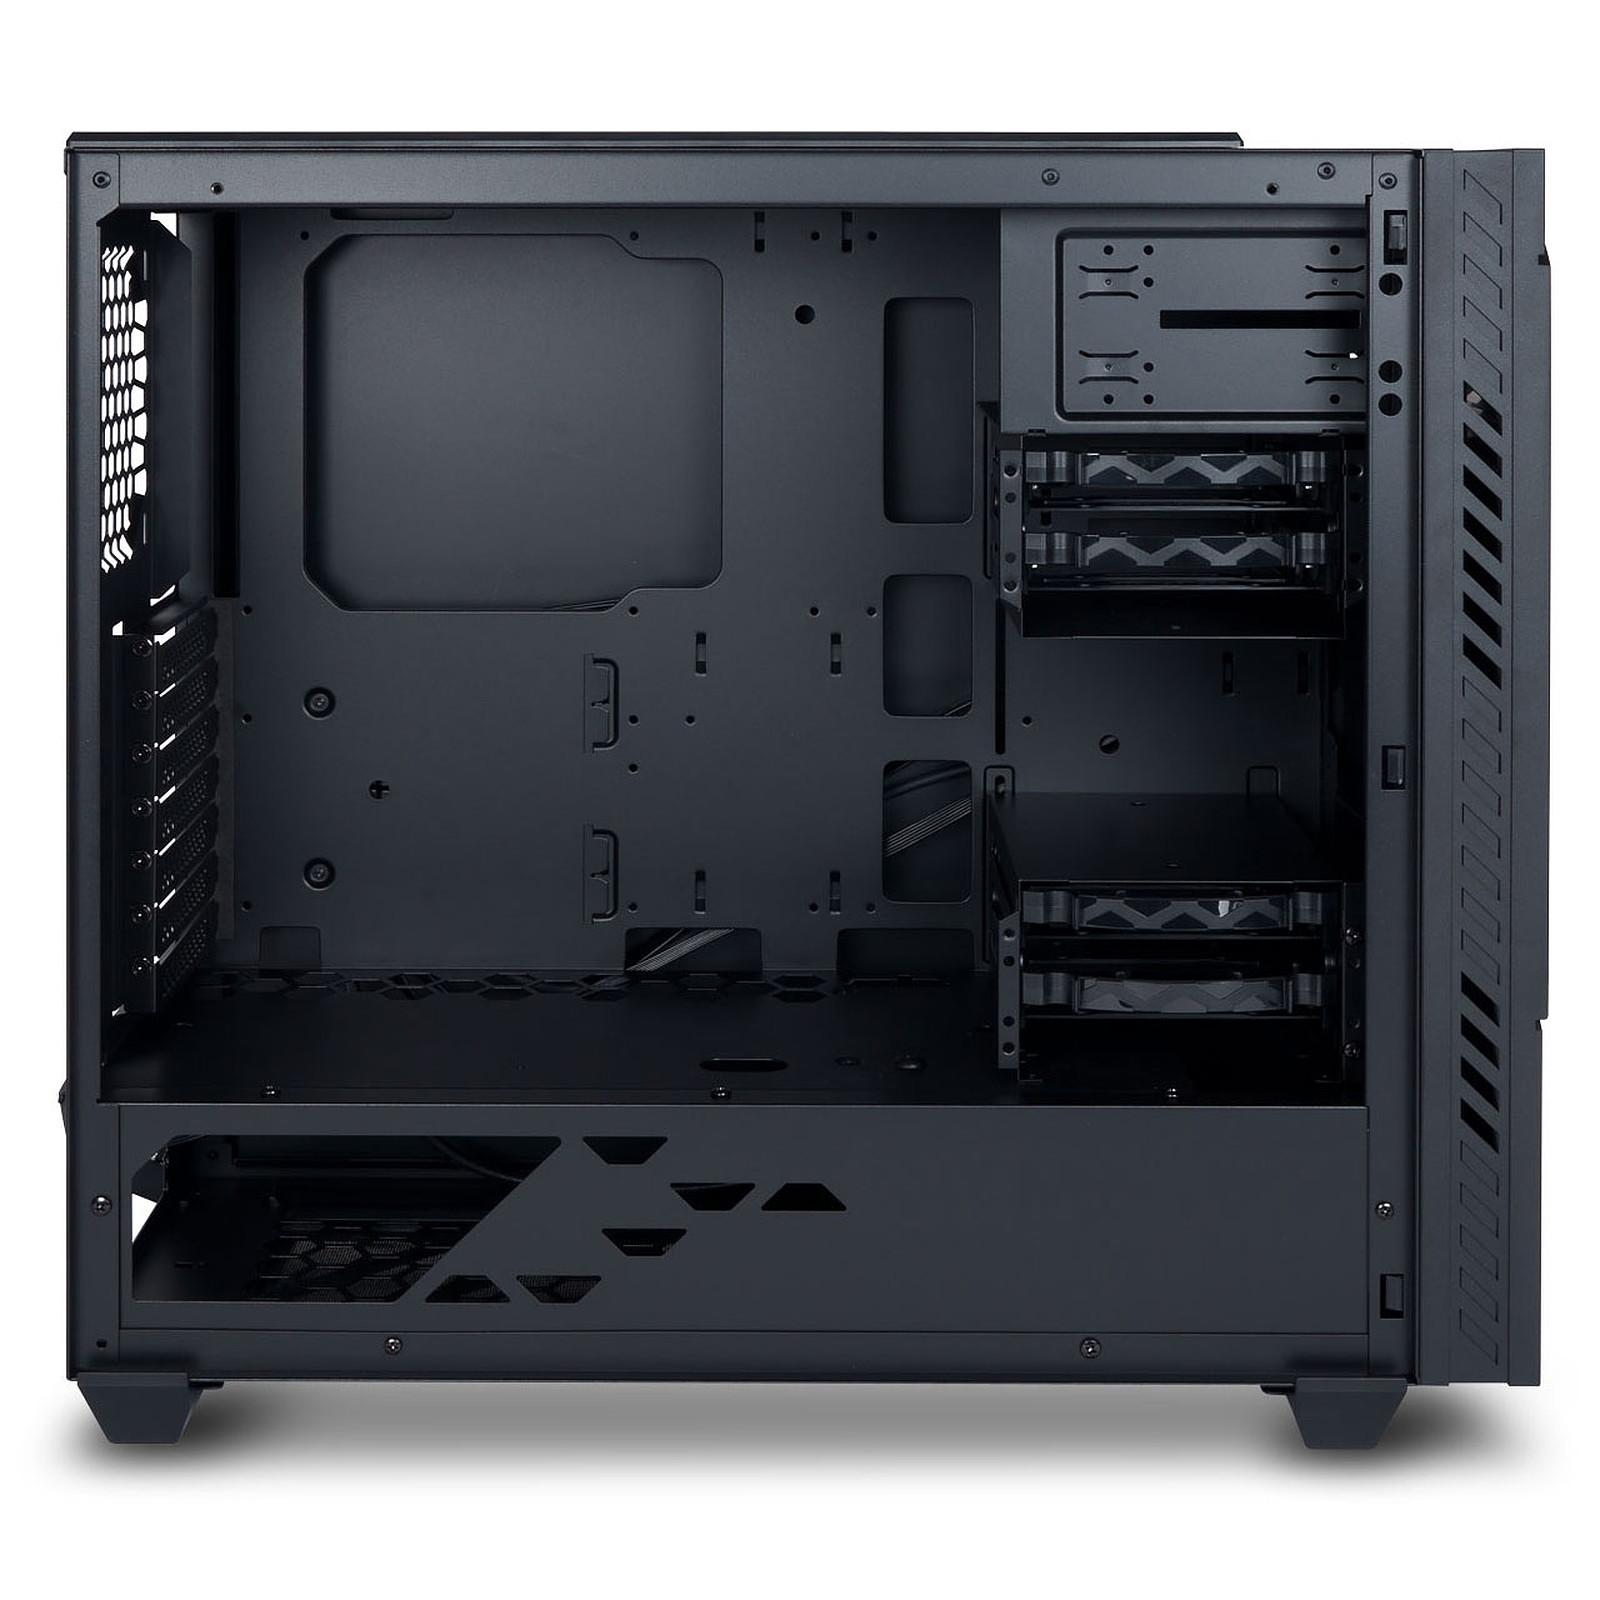 IN WIN C200B MID TOWER CASE